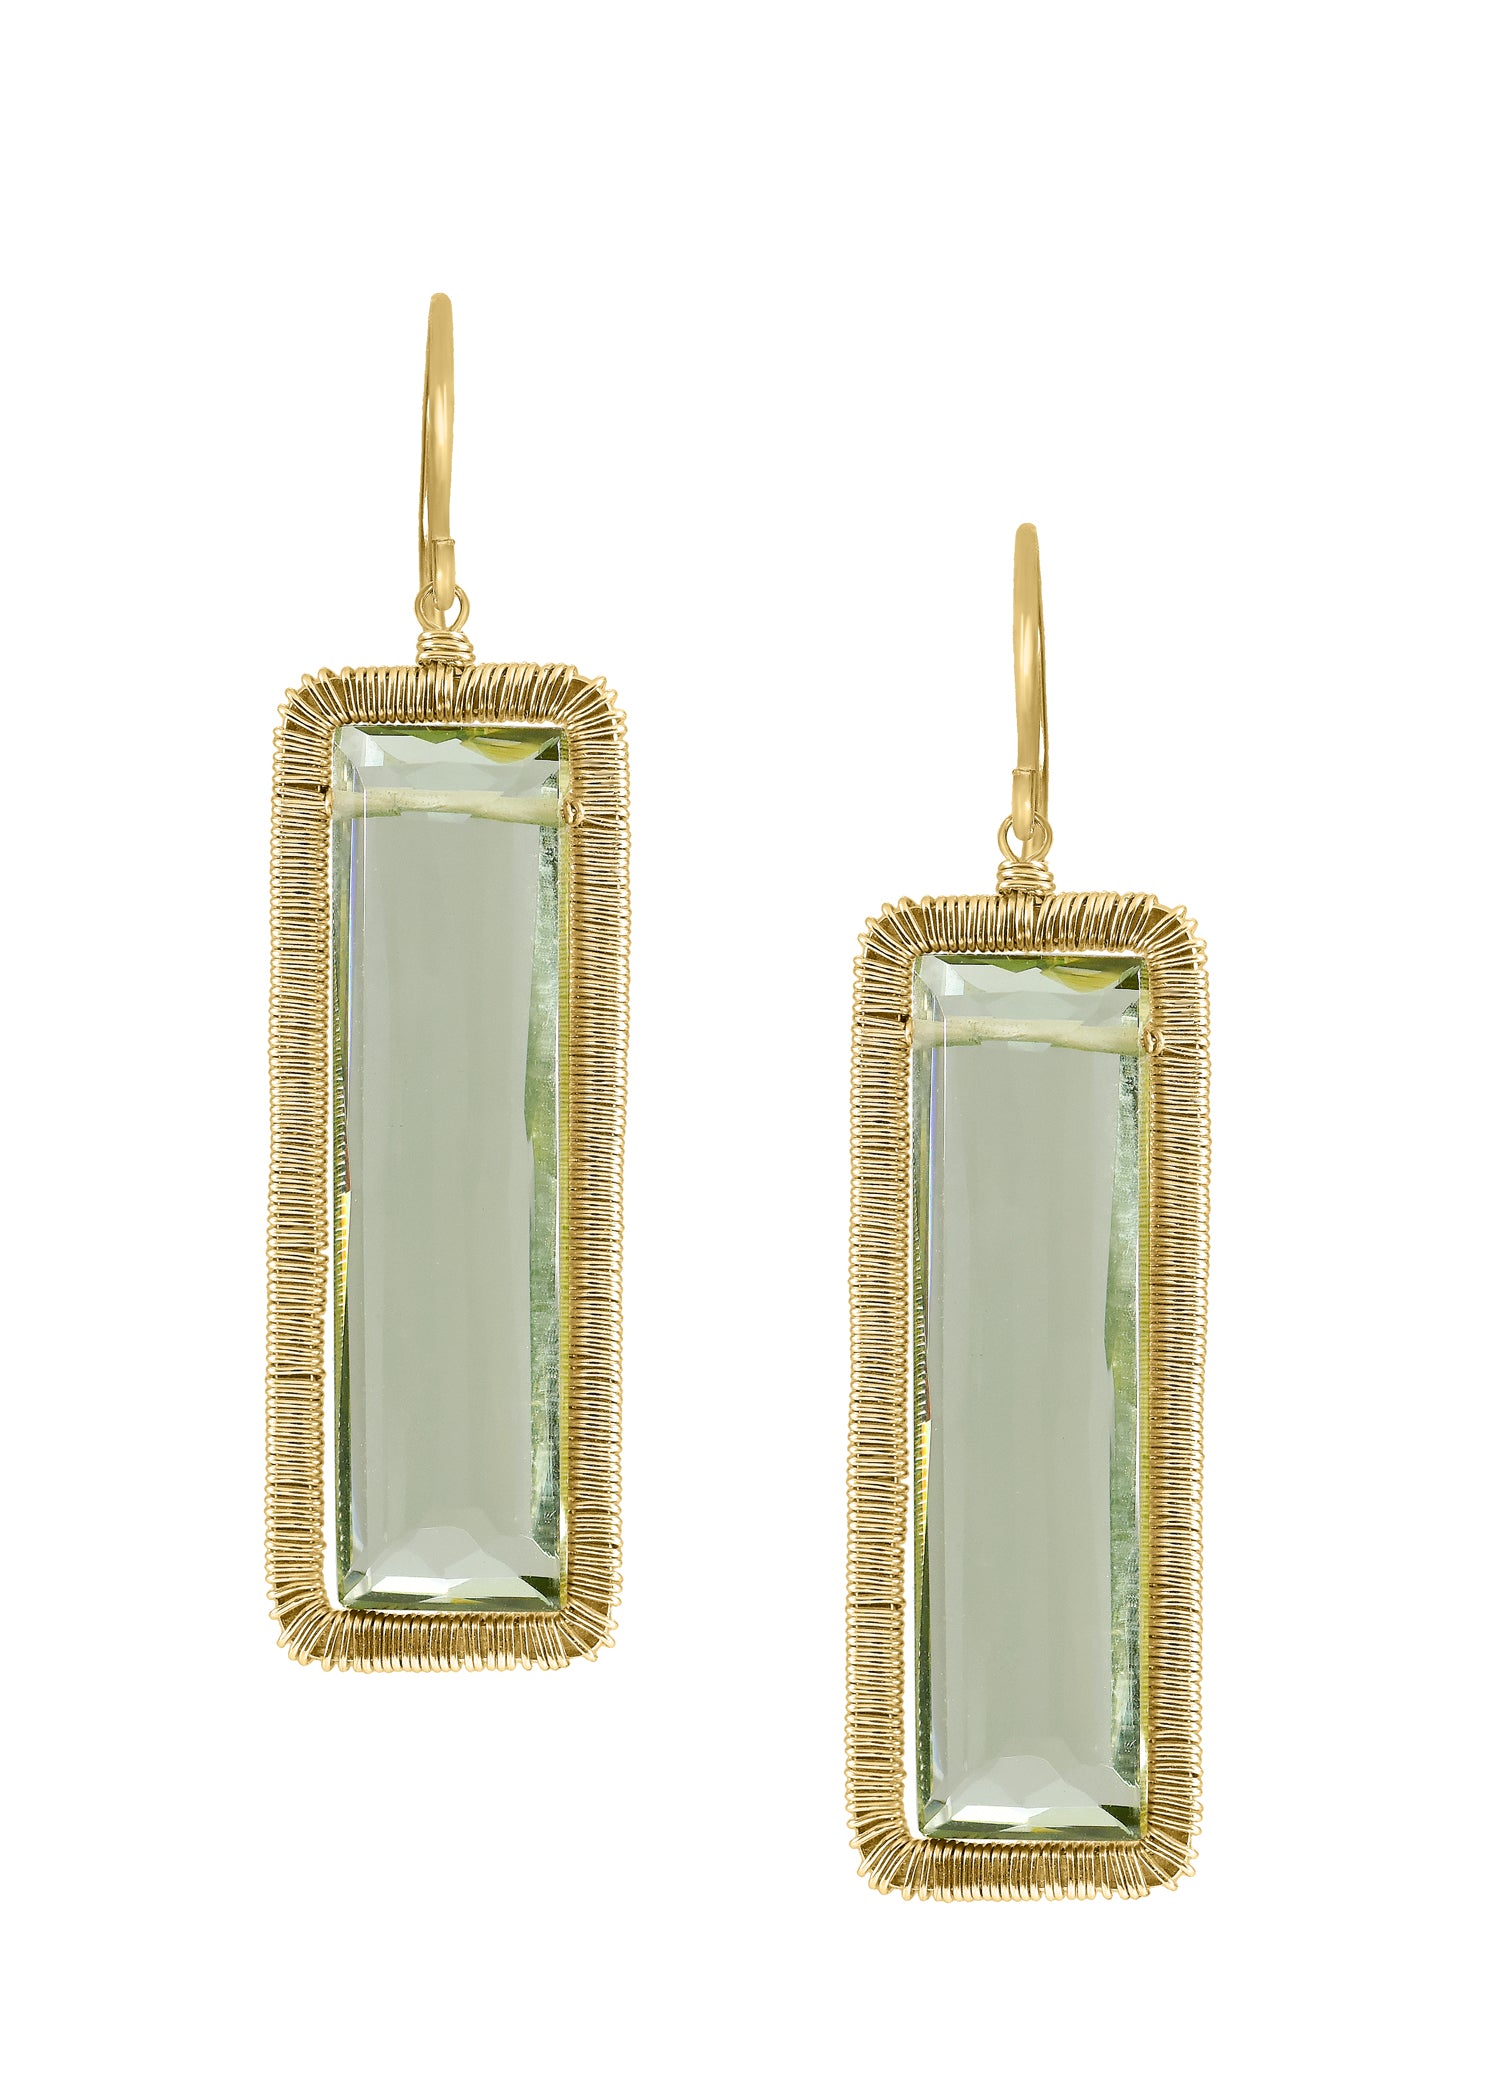 Green quartz 14k gold fill Earrings measure 1-3/4" in length (including the ear wires) and 7/16" in width Handmade in our Los Angeles studio